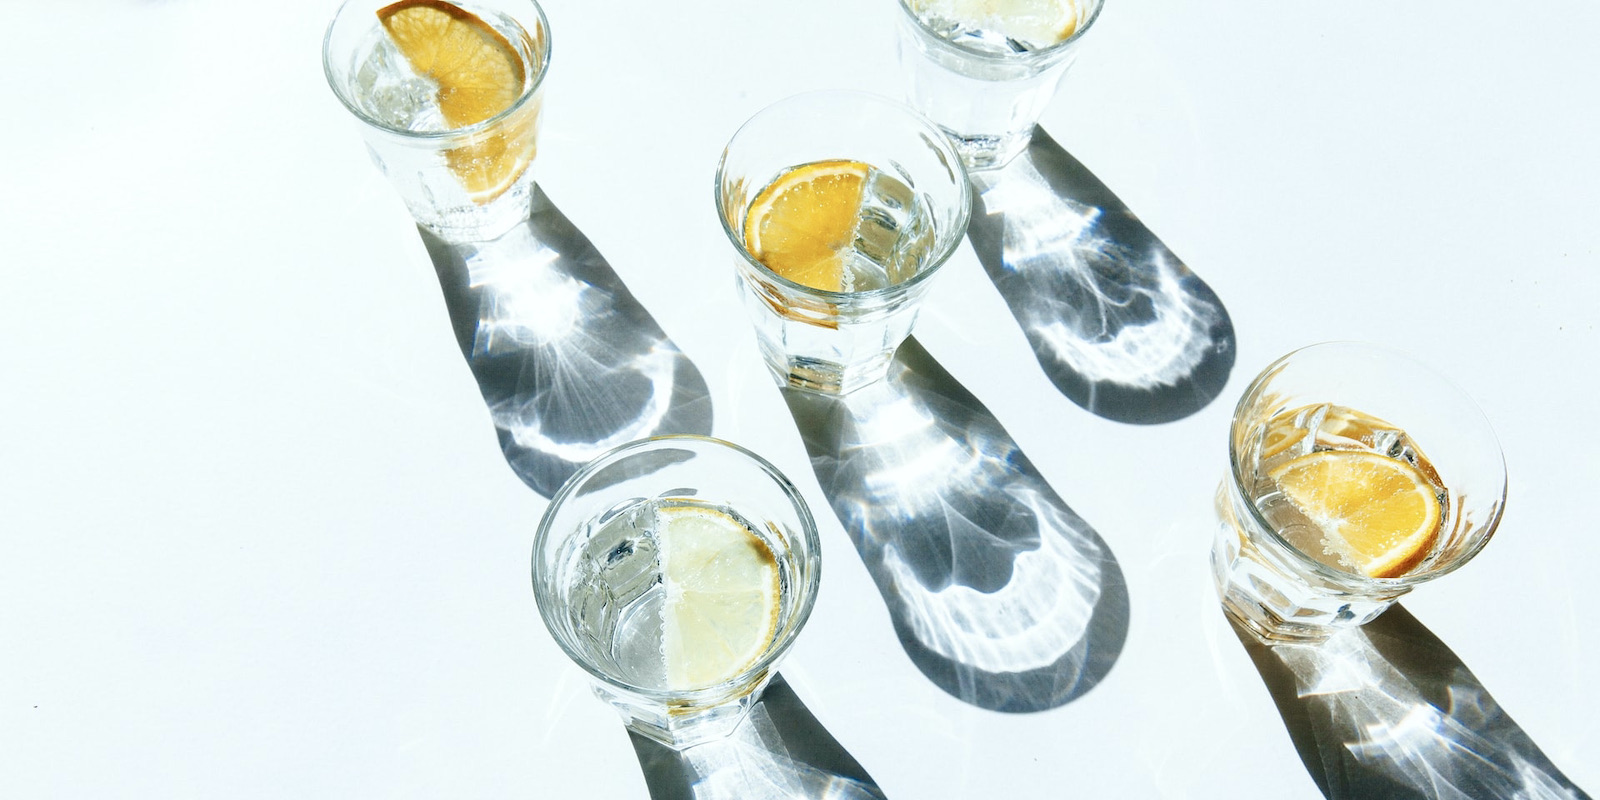 A bright photograph of water glasses with lemon slices in them creating shadows on an empty surface